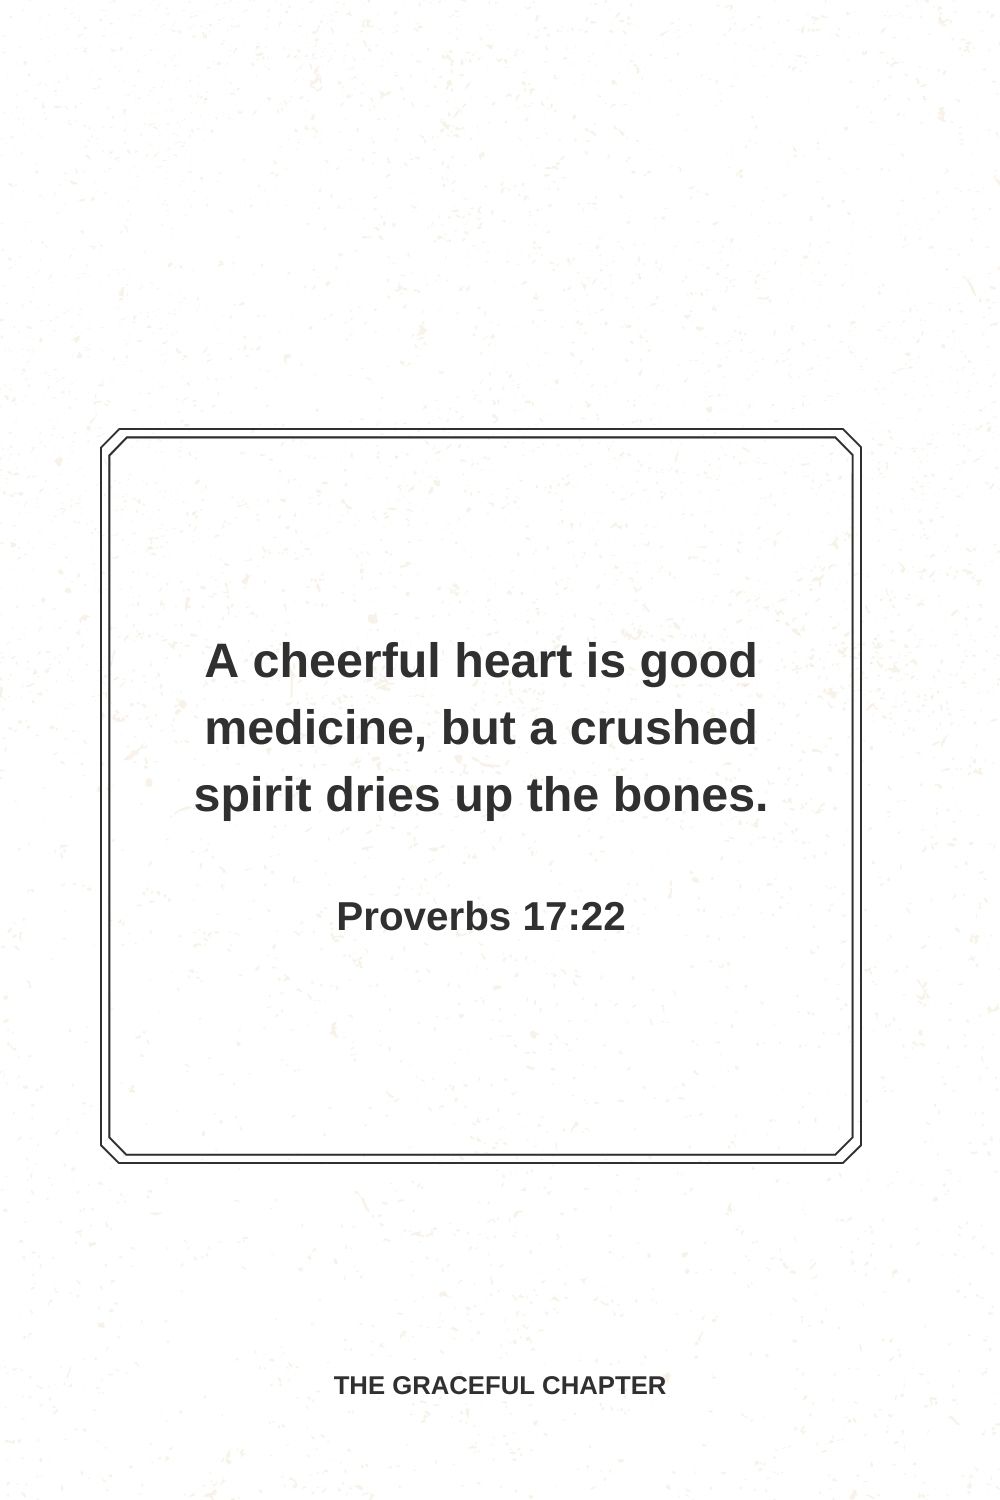 A cheerful heart is good medicine, but a crushed spirit dries up the bones. Proverbs 17:22